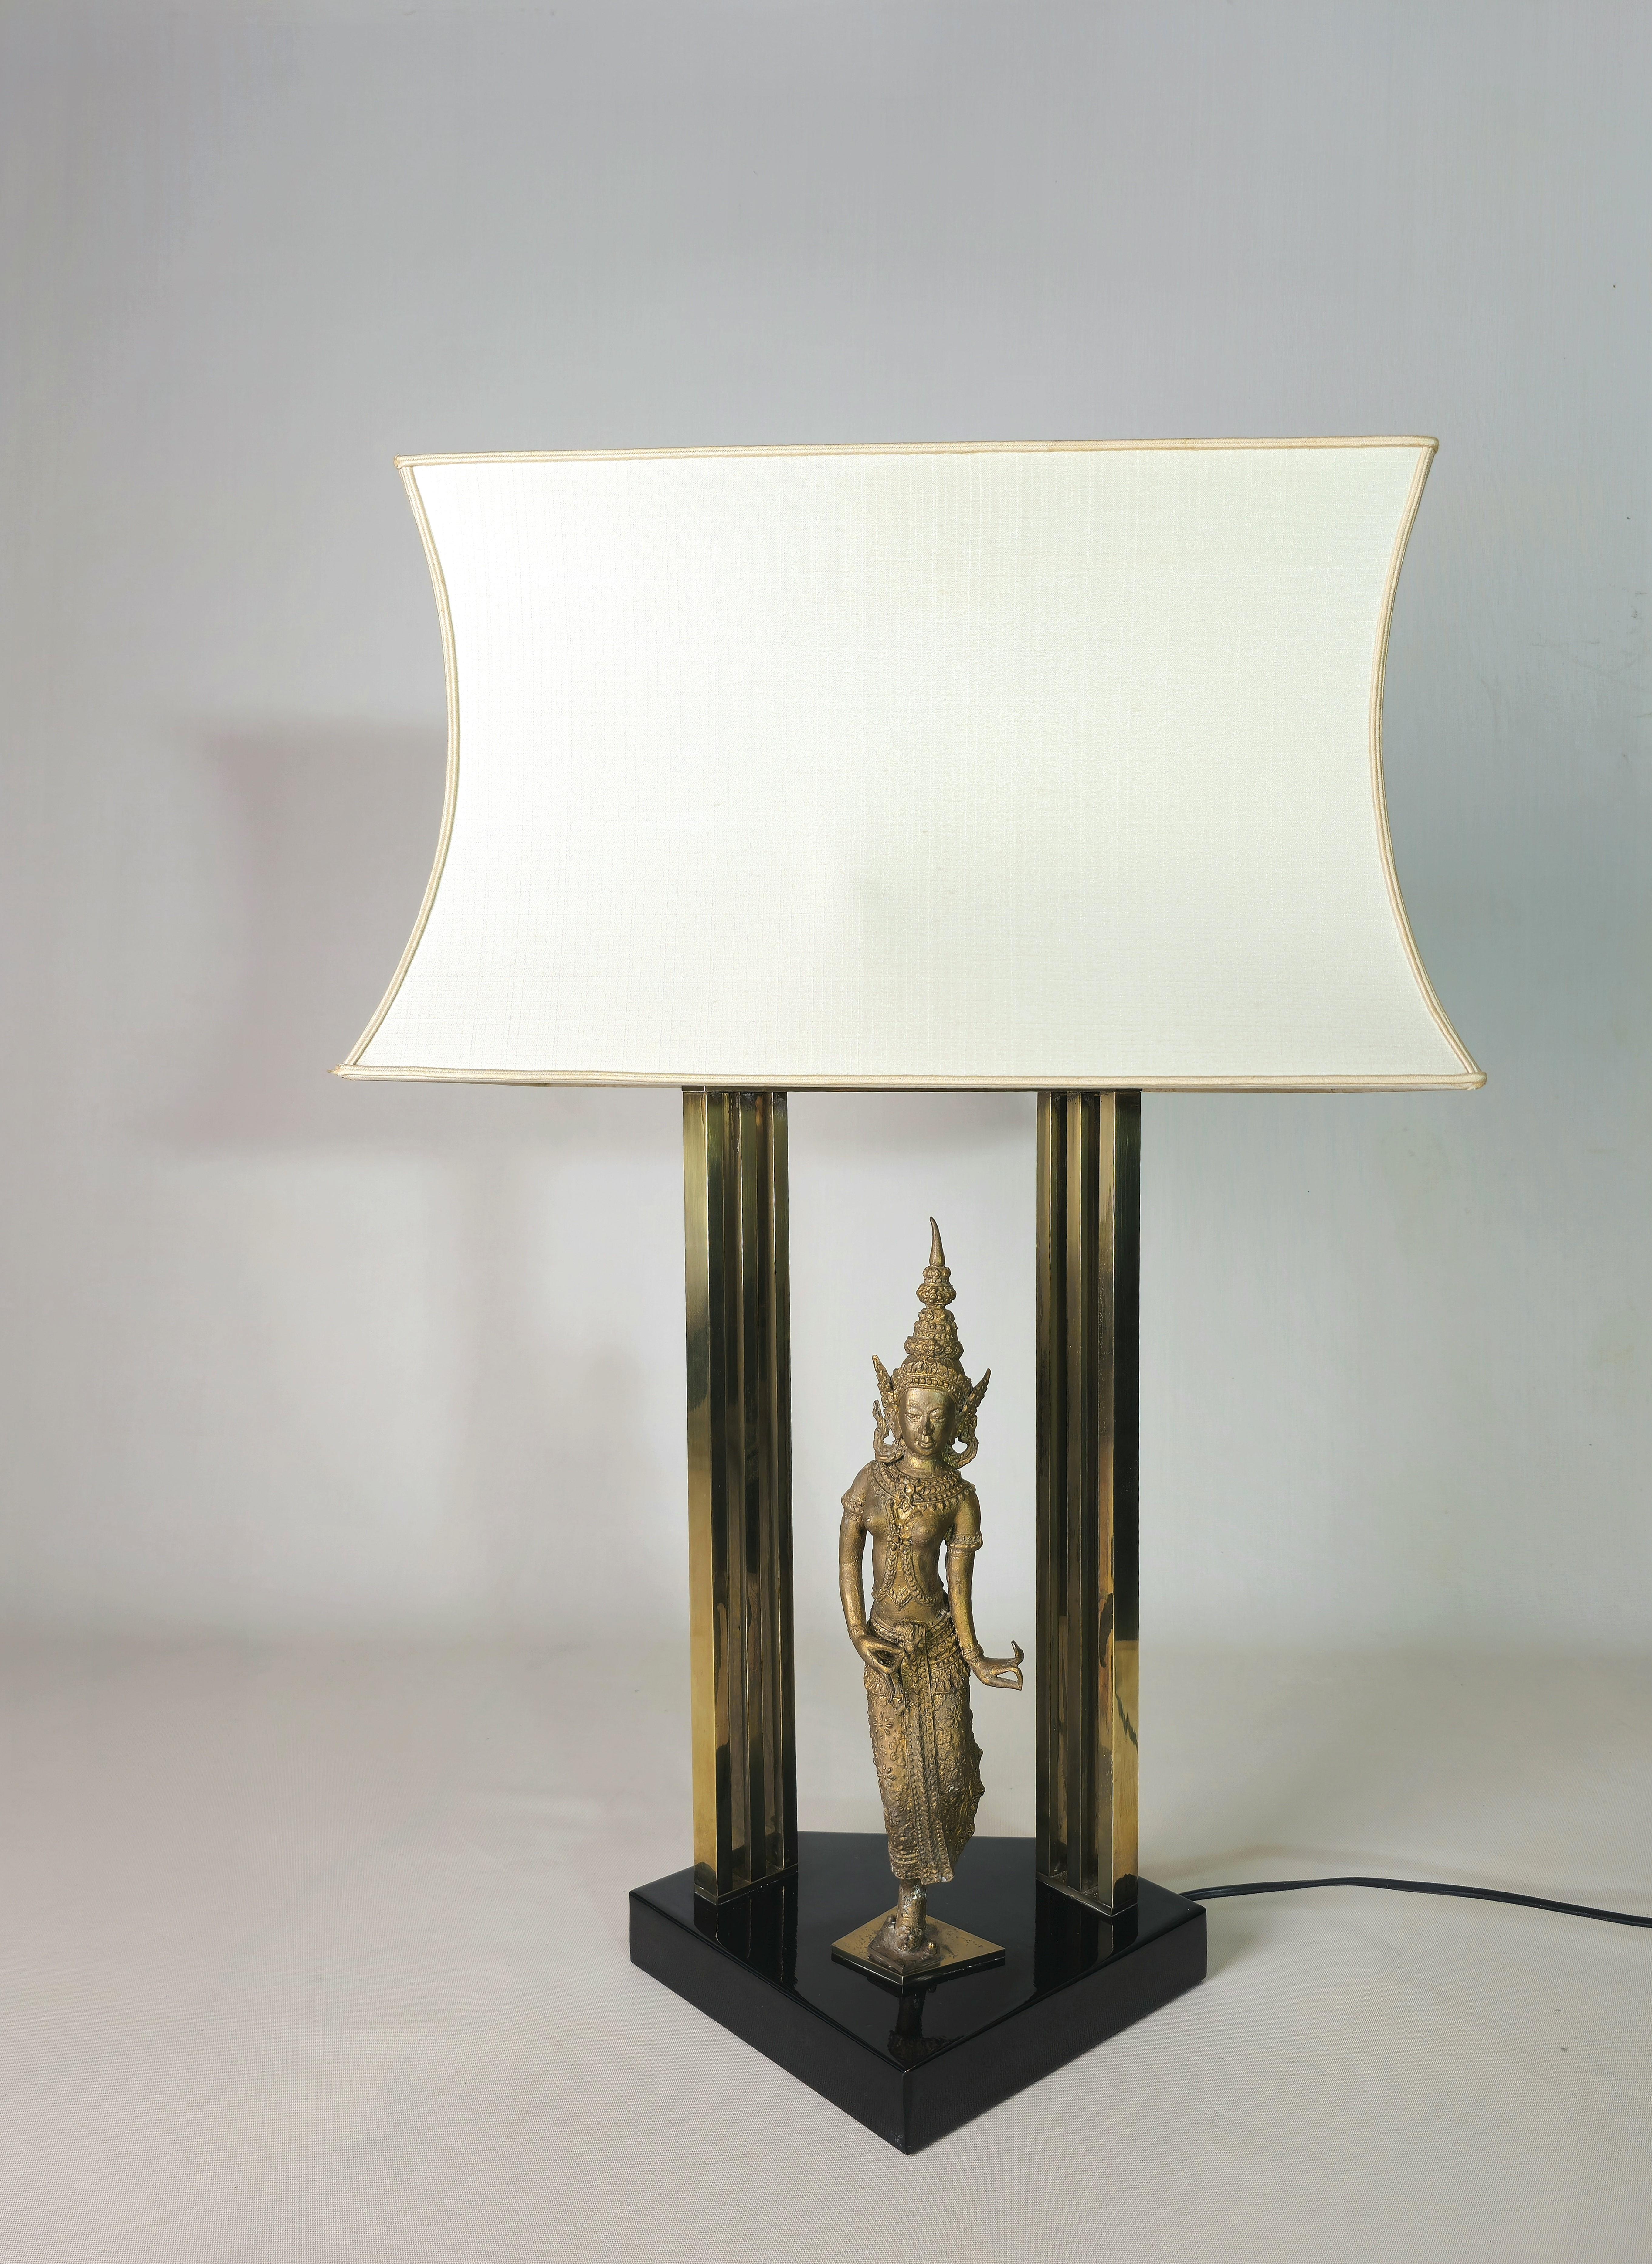 Italian Table Lamps Brass Midcentury Modern Design Italy 1960/70s For Sale